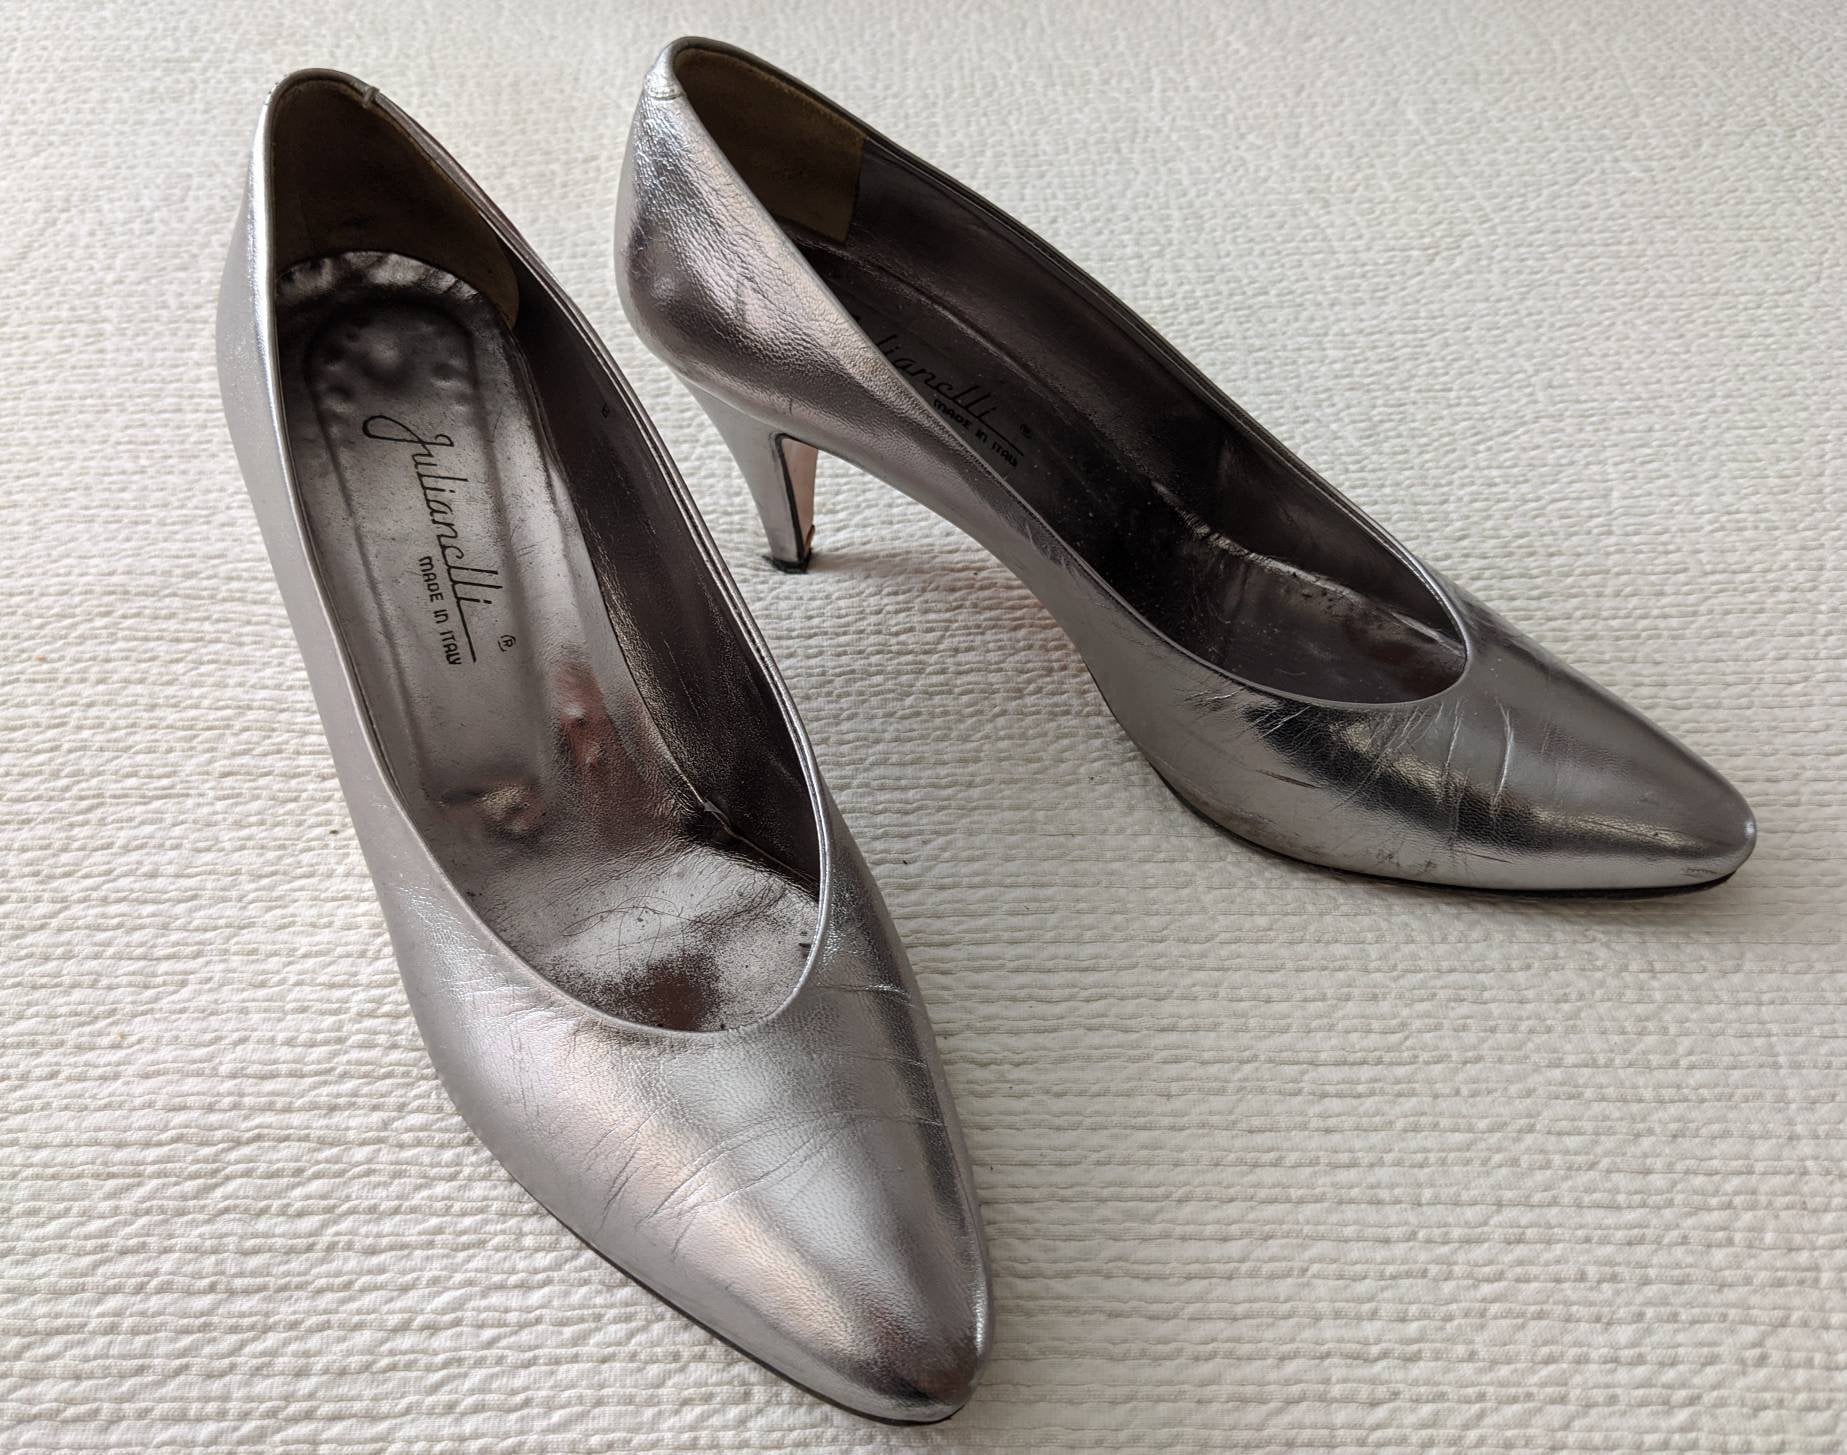 CHANEL SHOES PUMPS BOW 40.5 SILVER LIZARD LEATHER SHOES Silvery ref.517652  - Joli Closet